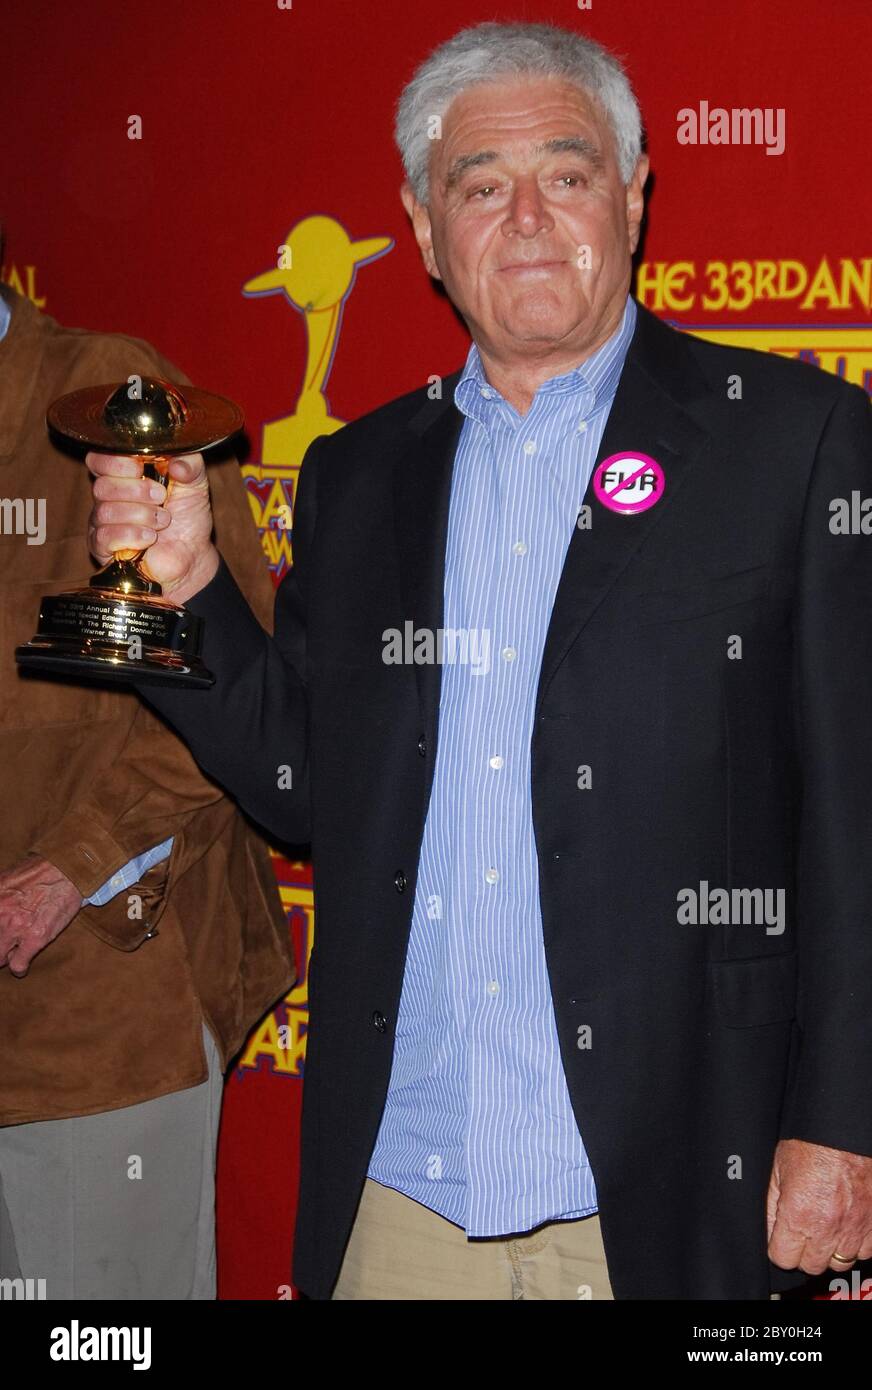 Richard Donner, Winner for Best DVD Special Edition Release of 'Superman II' at the 33rd Annual Saturn Awards - Press Room held at the Universal City Hilton & Towers in Universal City, CA. The event took place on Thursday, May 10, 2007. Photo by: SBM / PictureLux - File Reference # 34006-4721SBMPLX Stock Photo